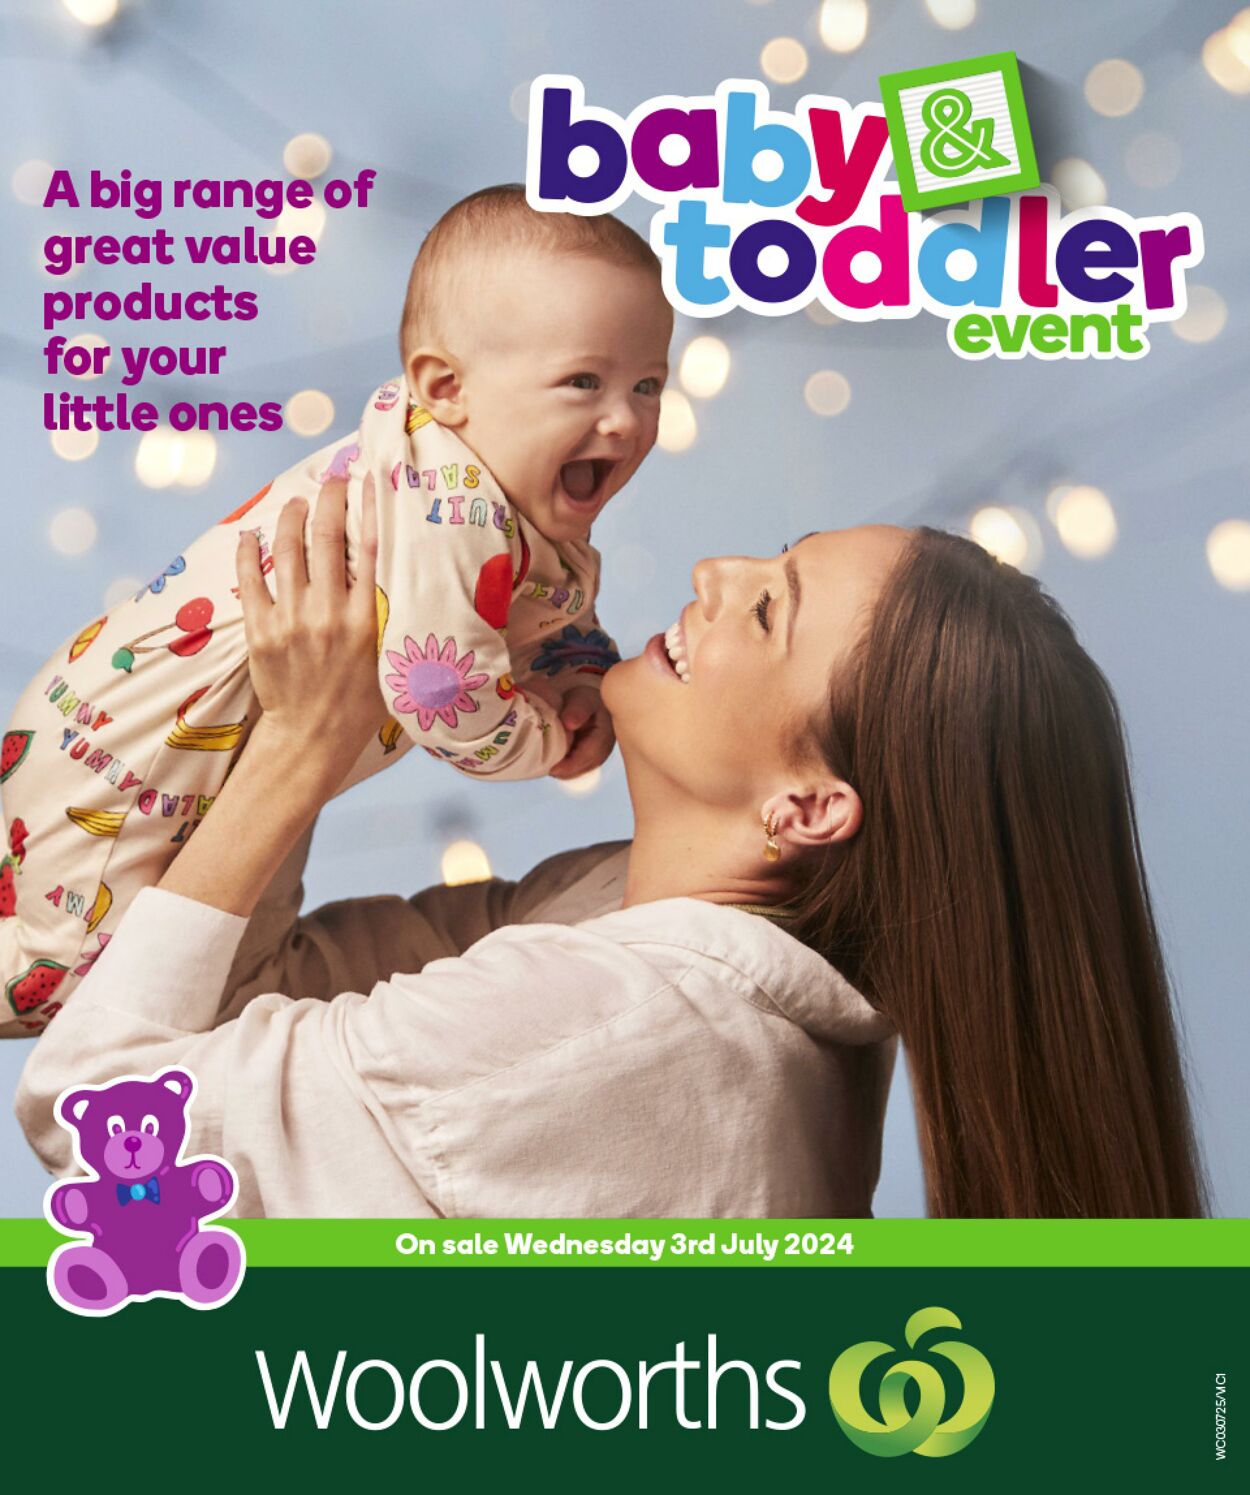 Catalogue Woolworths - Baby Toddler Event Catalogue VIC 3 Jul, 2024 - 9 Jul, 2024